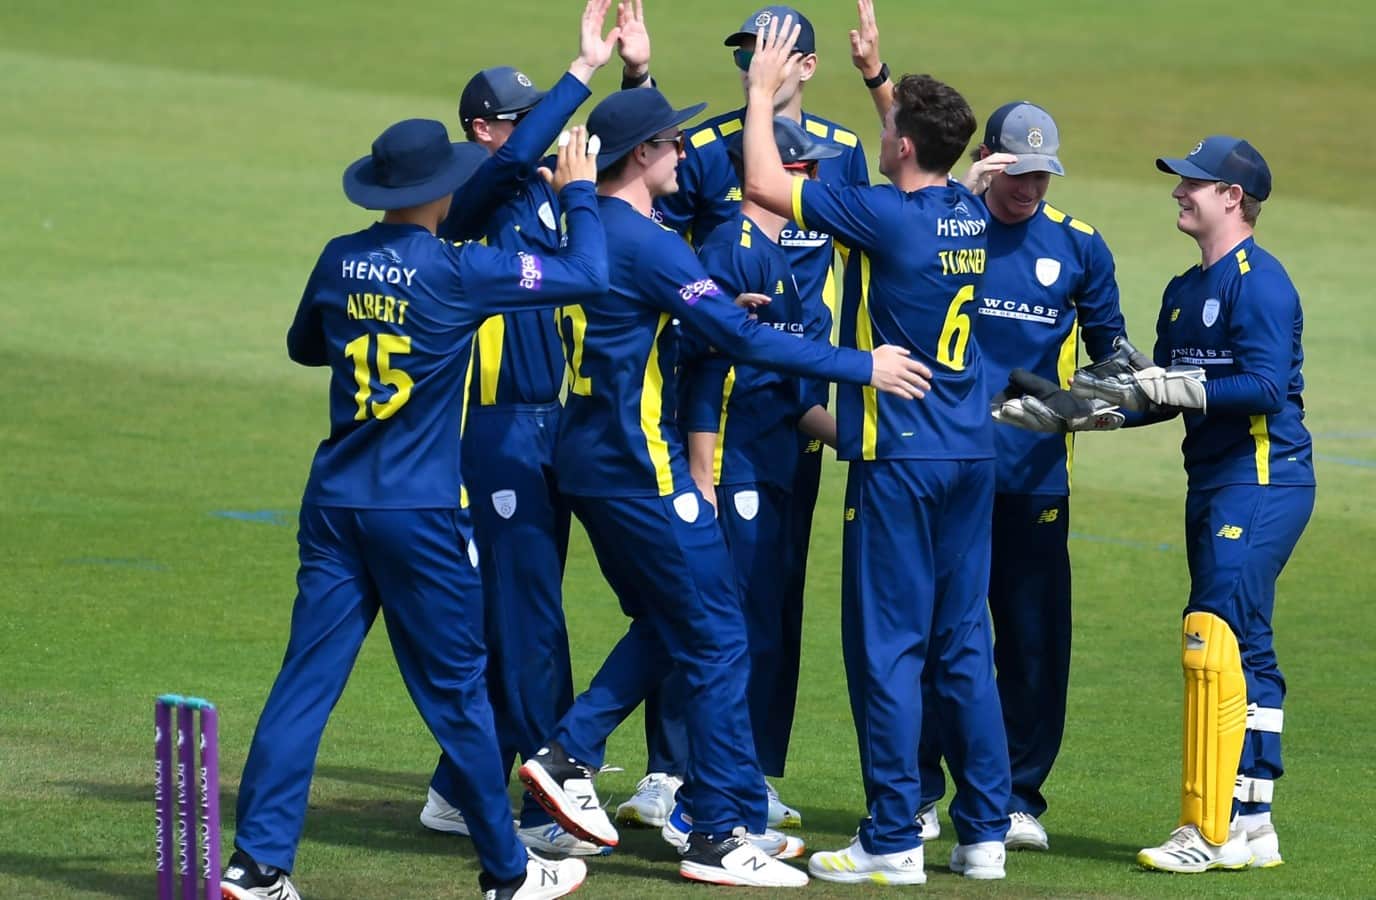 Royal London One-Day Cup 2022 | Group B Round-up, August 21